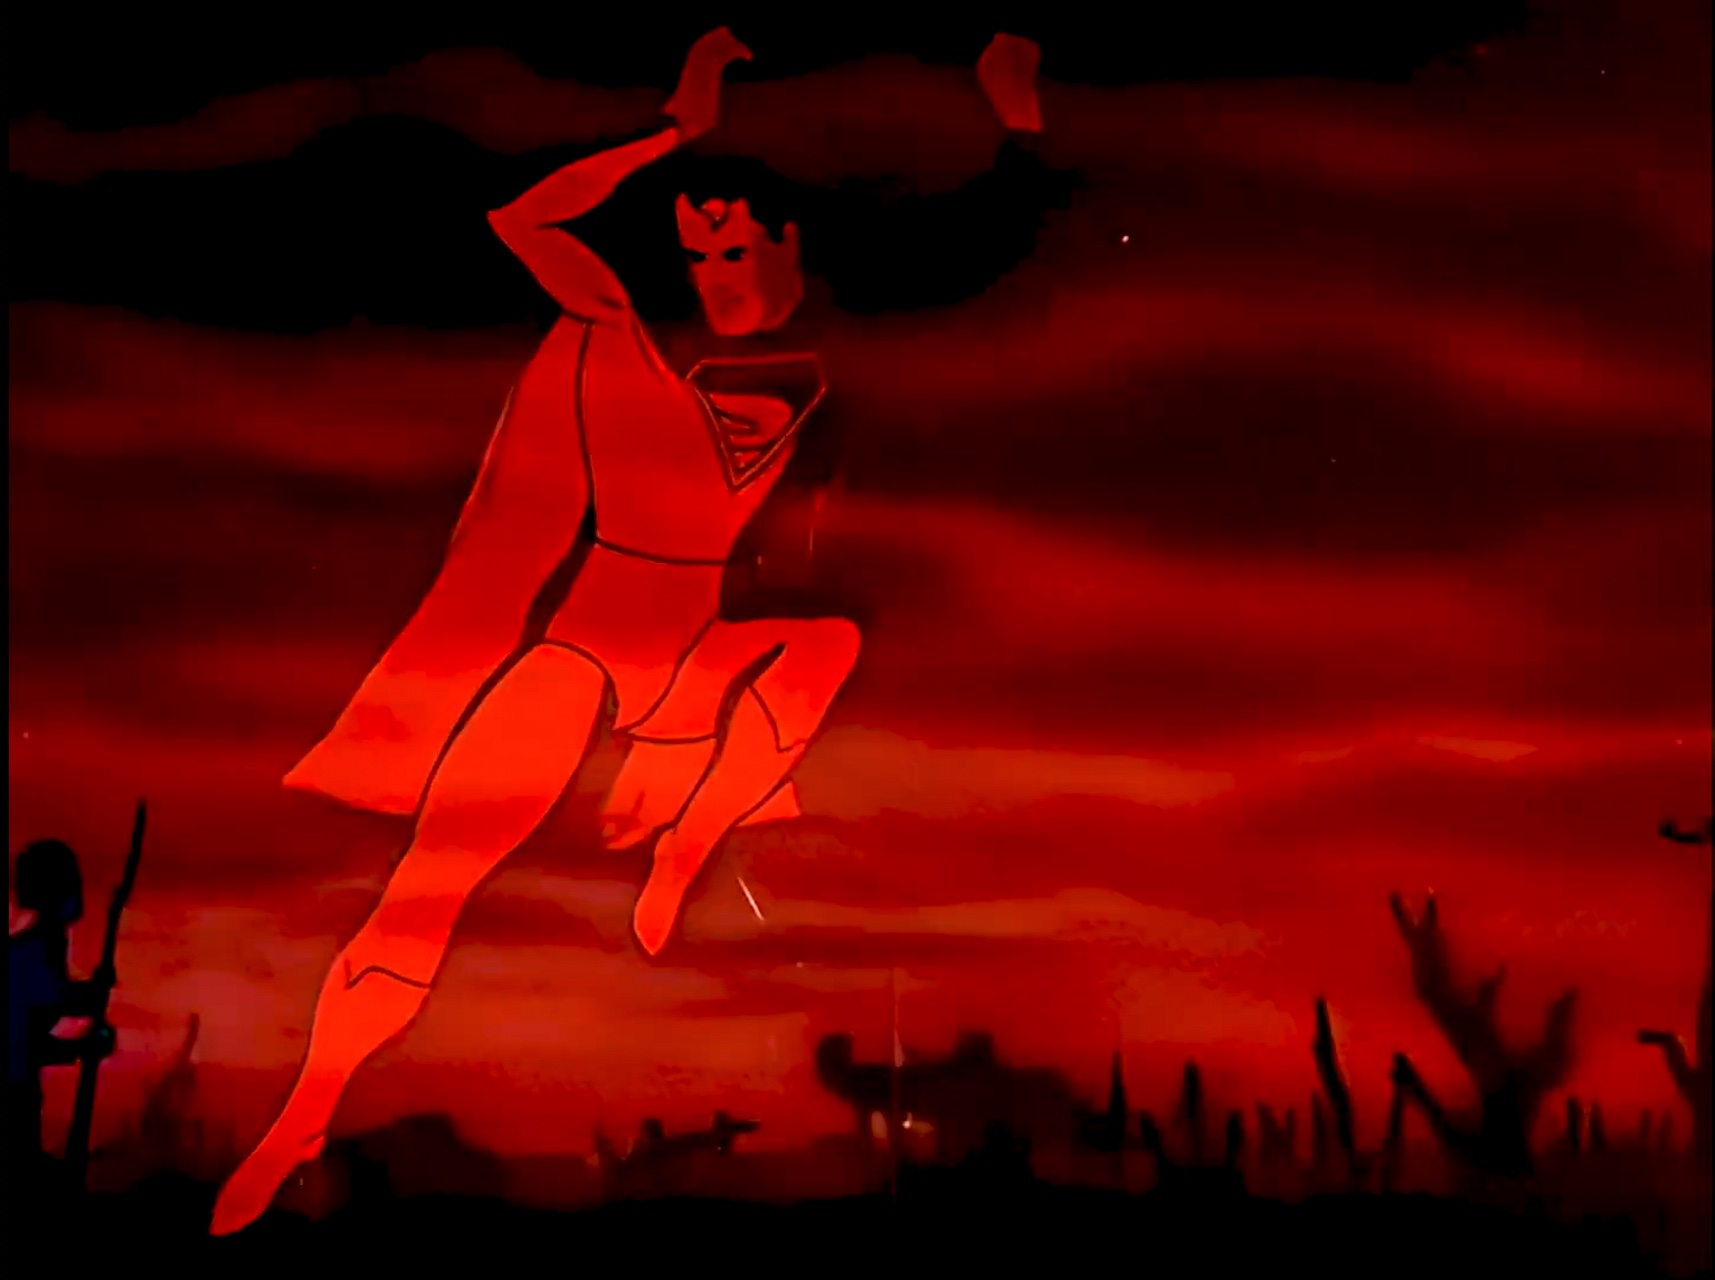 Superman committing sabotage in Japan during World War II in "Eleventh Hour"